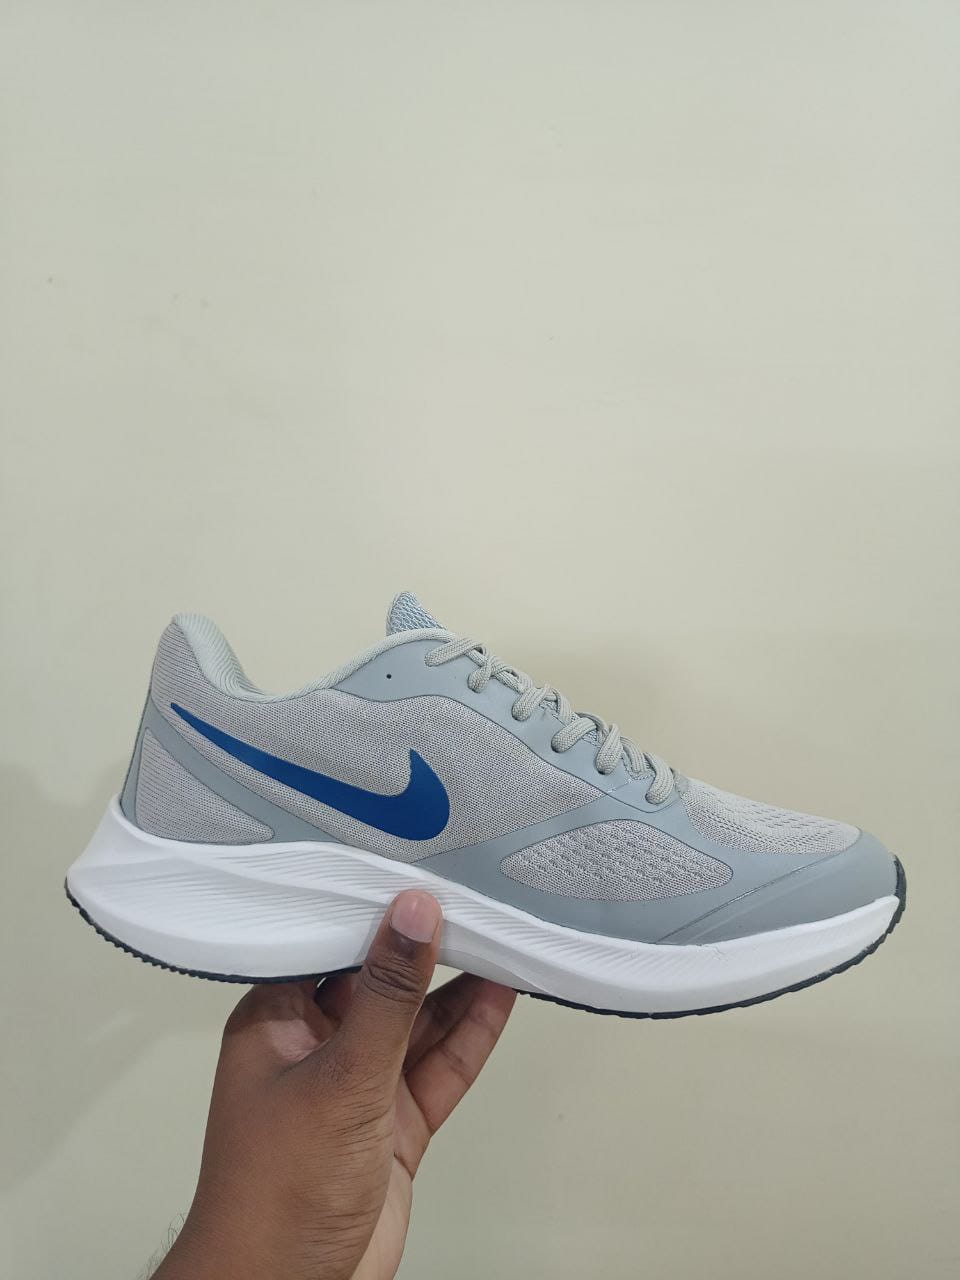 Nike Guide 10 Perl White - The Trendy